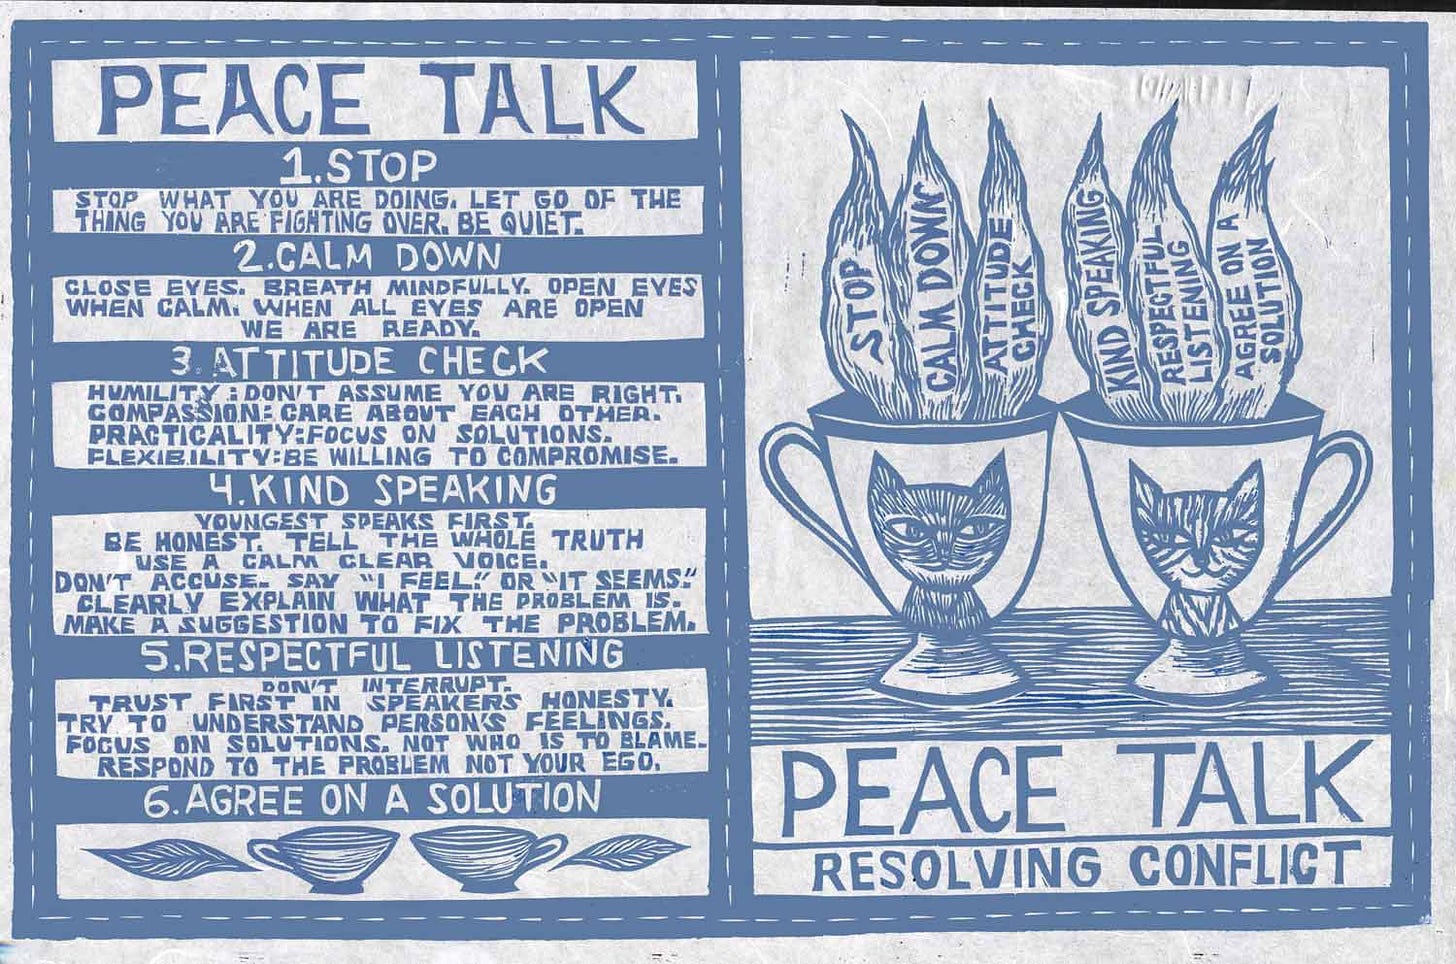 A horizontal woodcut printed in dusty blue. On the left, the text mentioned above is depicted. On the right side, text on the bottom states: “Peace Talk, resolving conflict.” Above, two teacups are decorated with the faces of smiling cats who are looking at each other. Flame-shaped word bubbles come out of the cups, reiterating the six steps for resolving conflict.